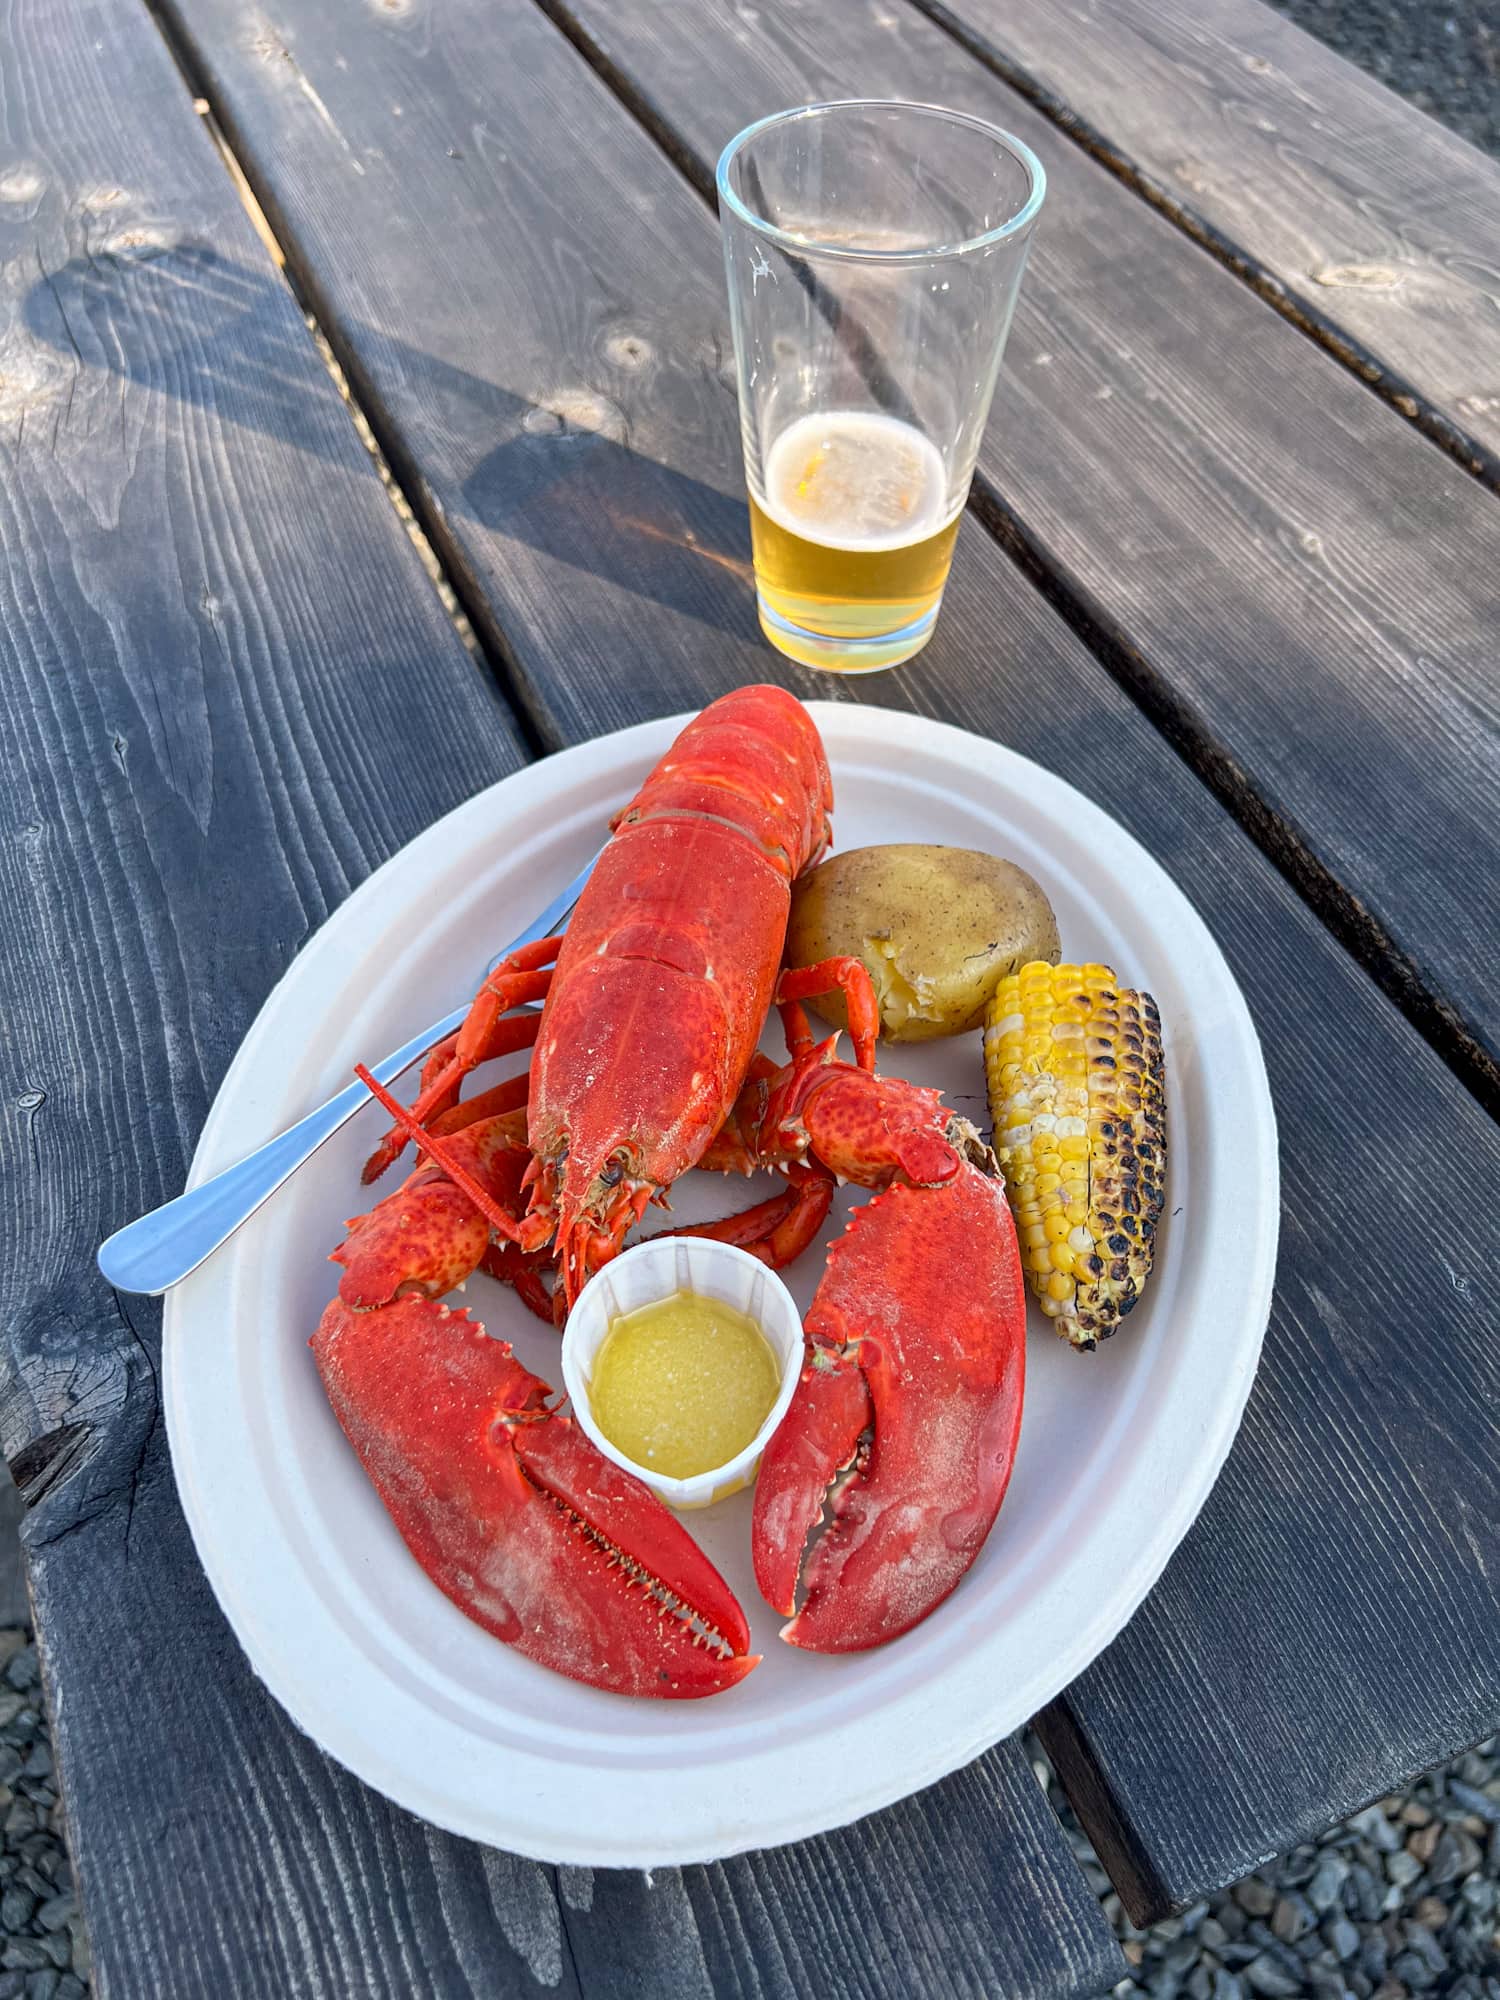 Maine lobster and beer